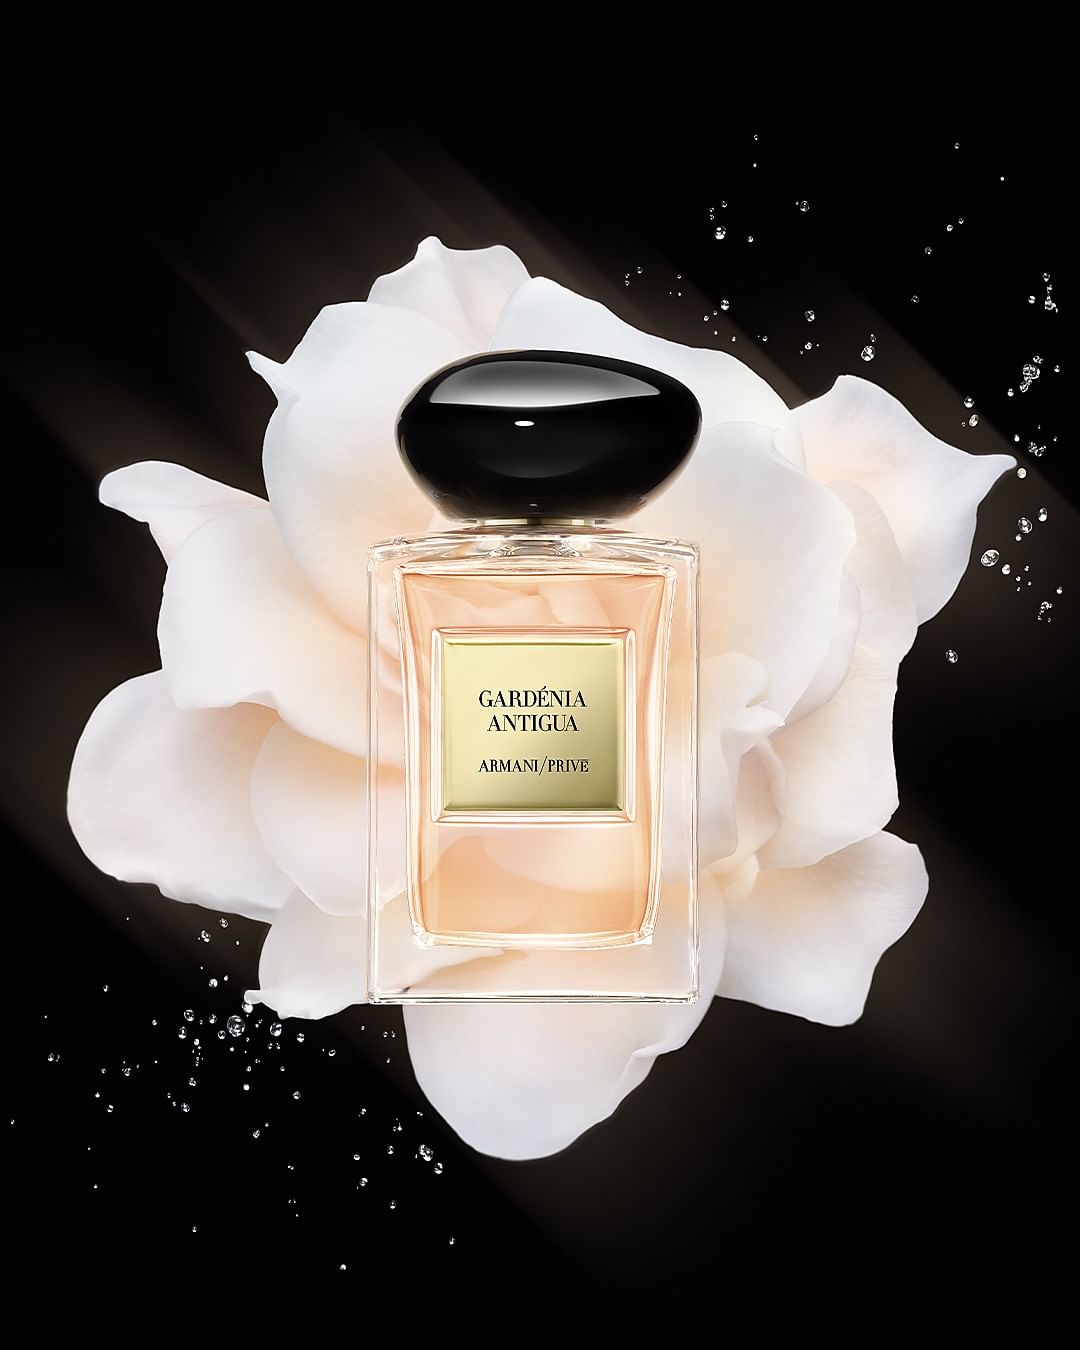 Armani beauty - A fragrant journey to the island of Antigua. Armani/Privé GARDÉNIA ANTIGUA is infused with intense pure light, beautiful floral nuances and powdery facets to create a voluptuous and...